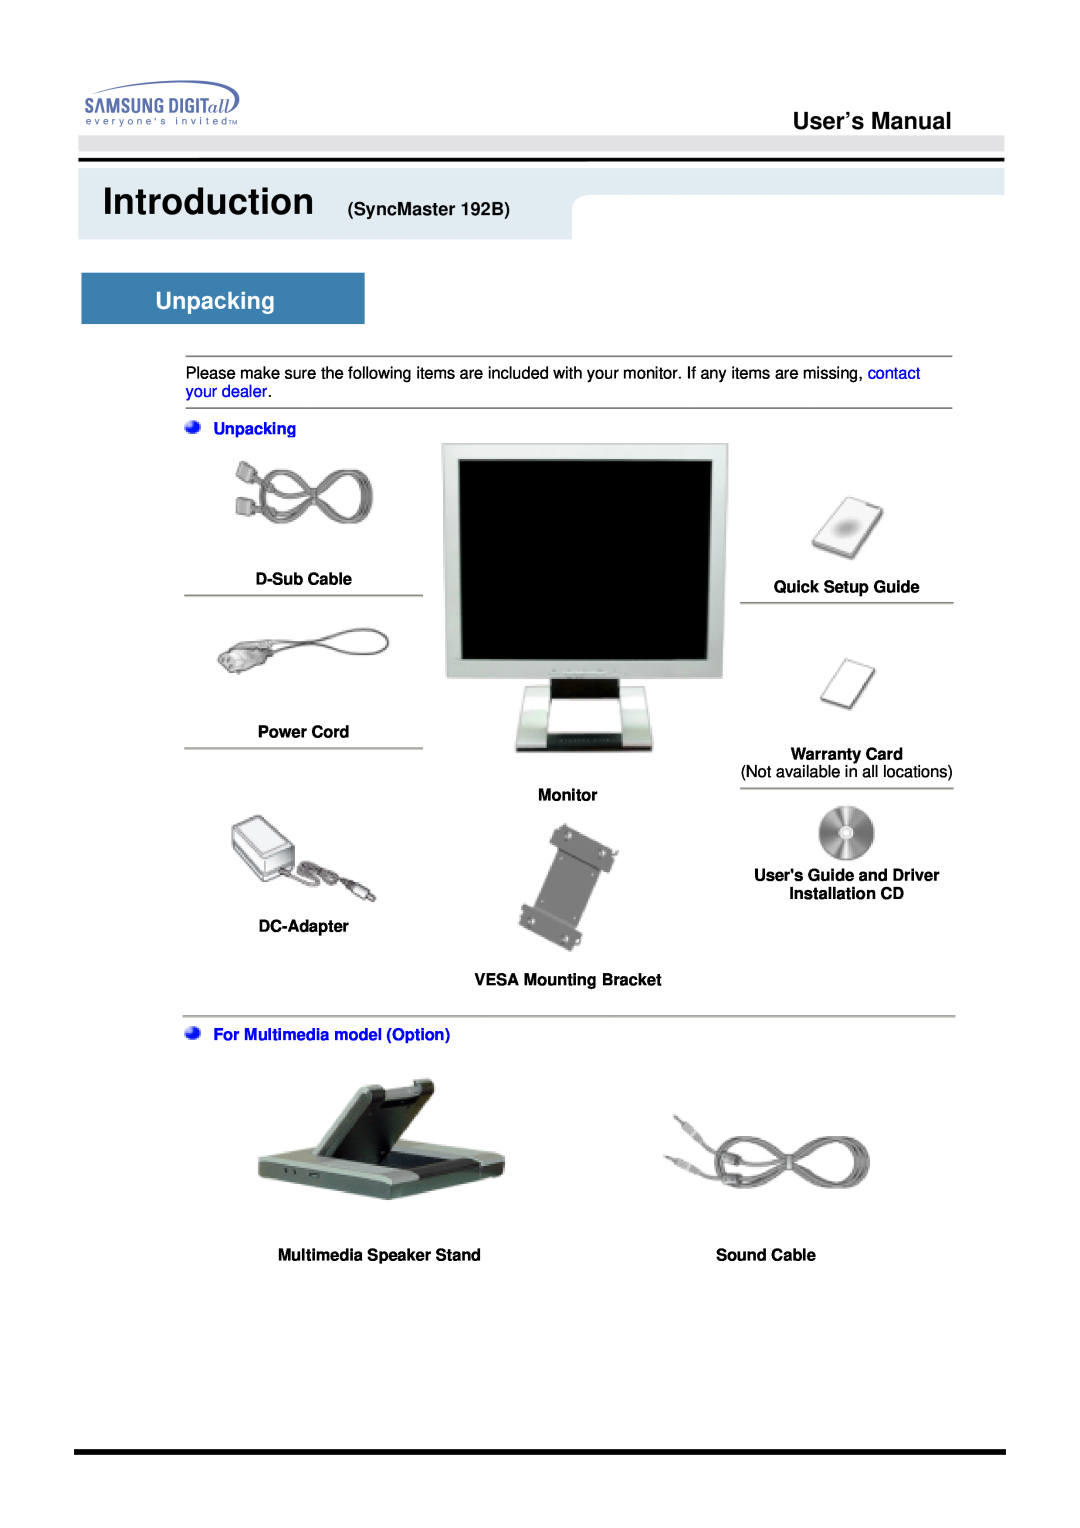 Samsung Unpacking, User’s Manual, Introduction SyncMaster 192B, D-Sub Cable, Quick Setup Guide, VESA Mounting Bracket 